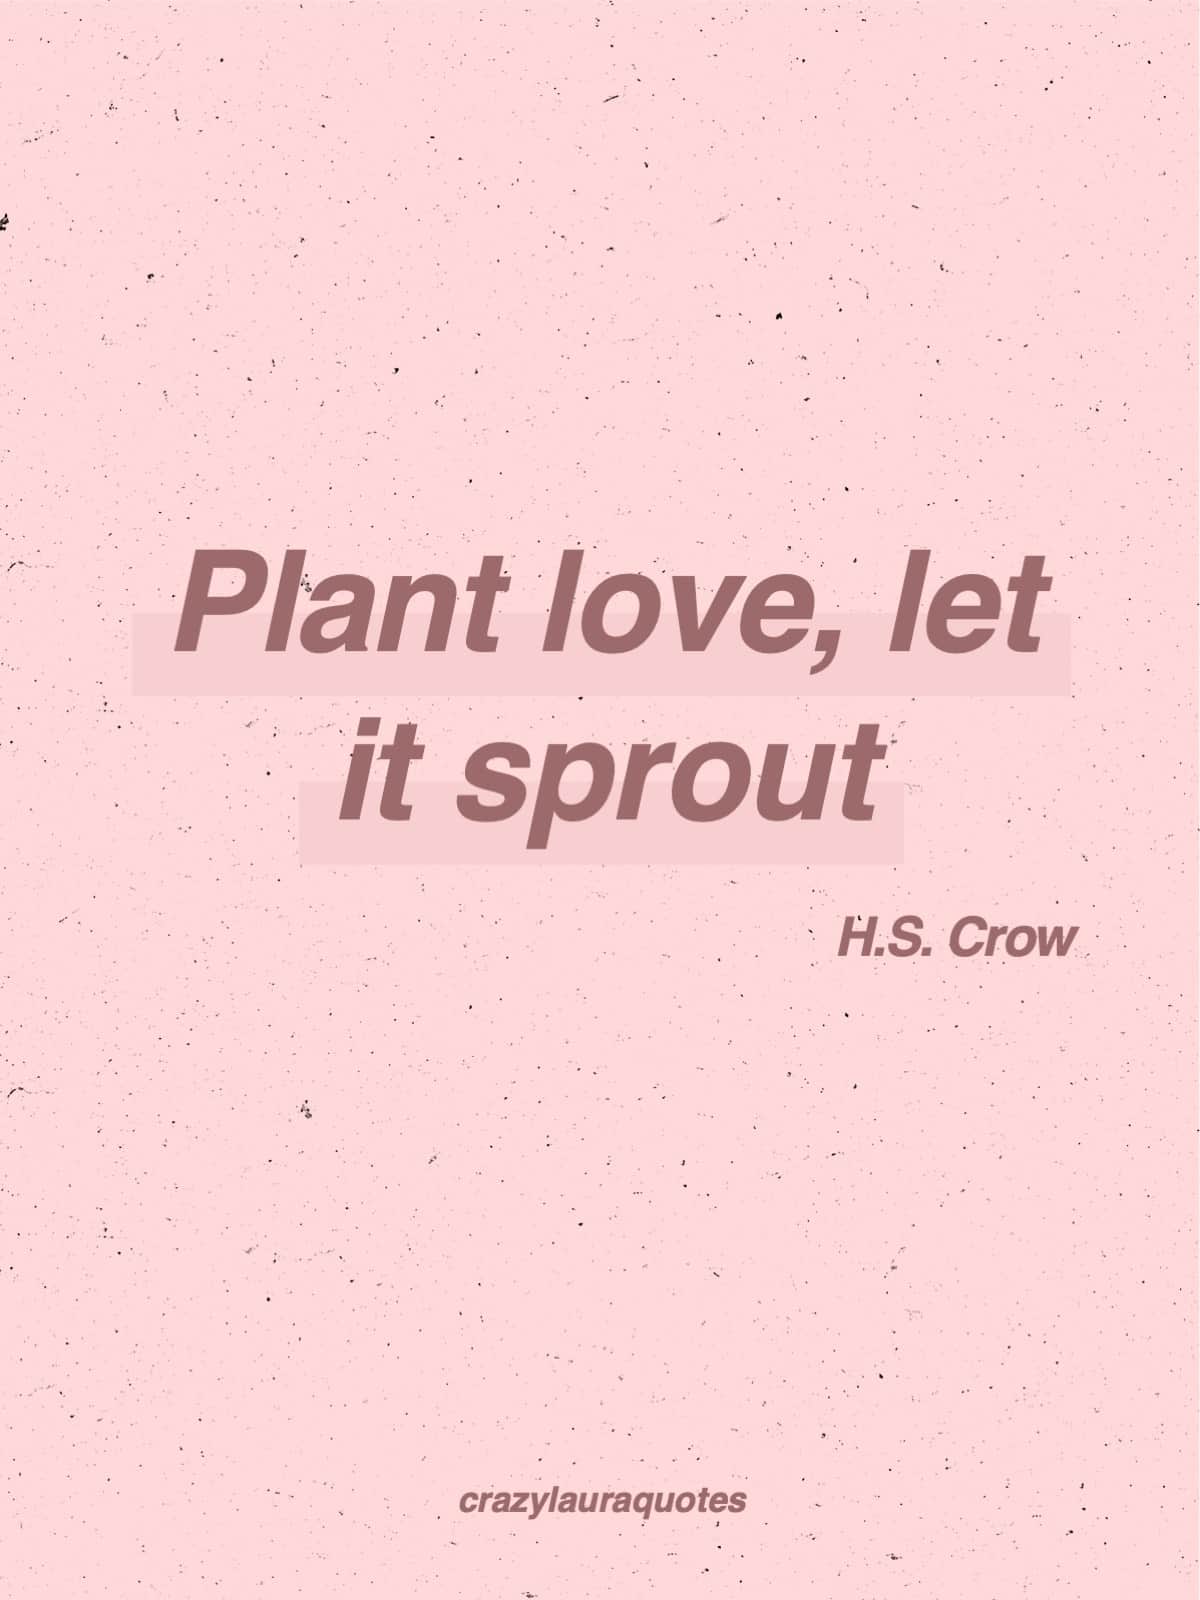 let love blossom hs crow quote